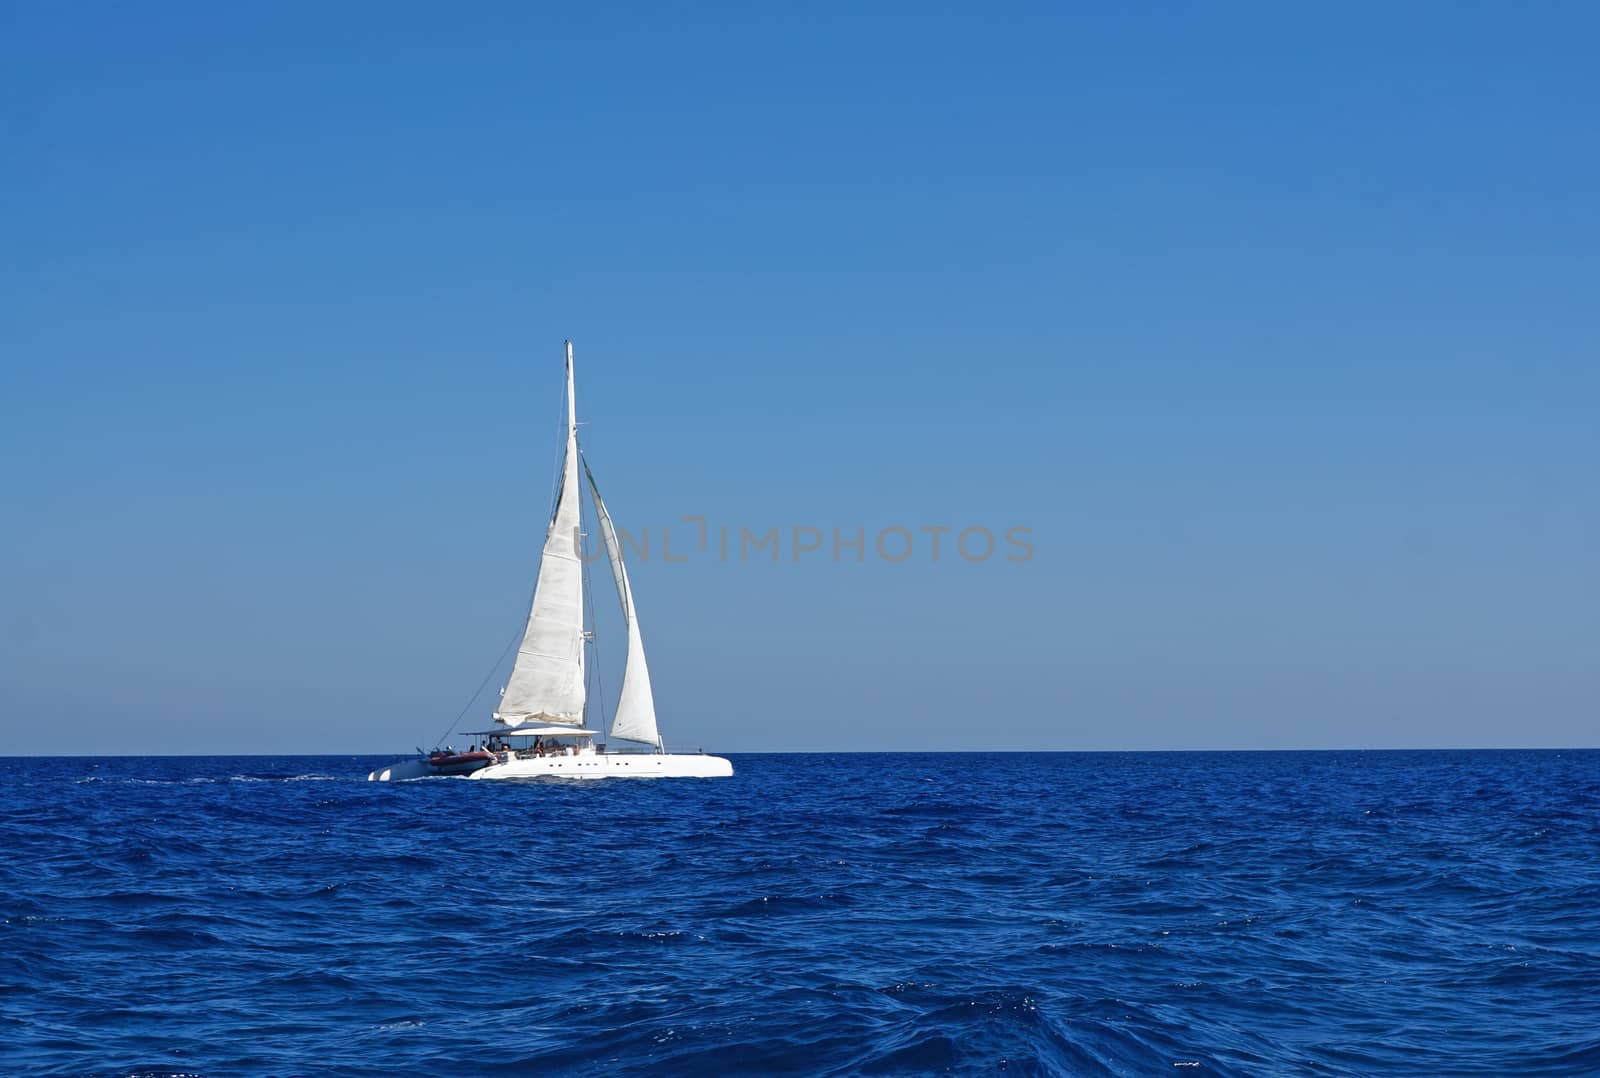 White boat with sails in the Mediterranean     by Chiffanna